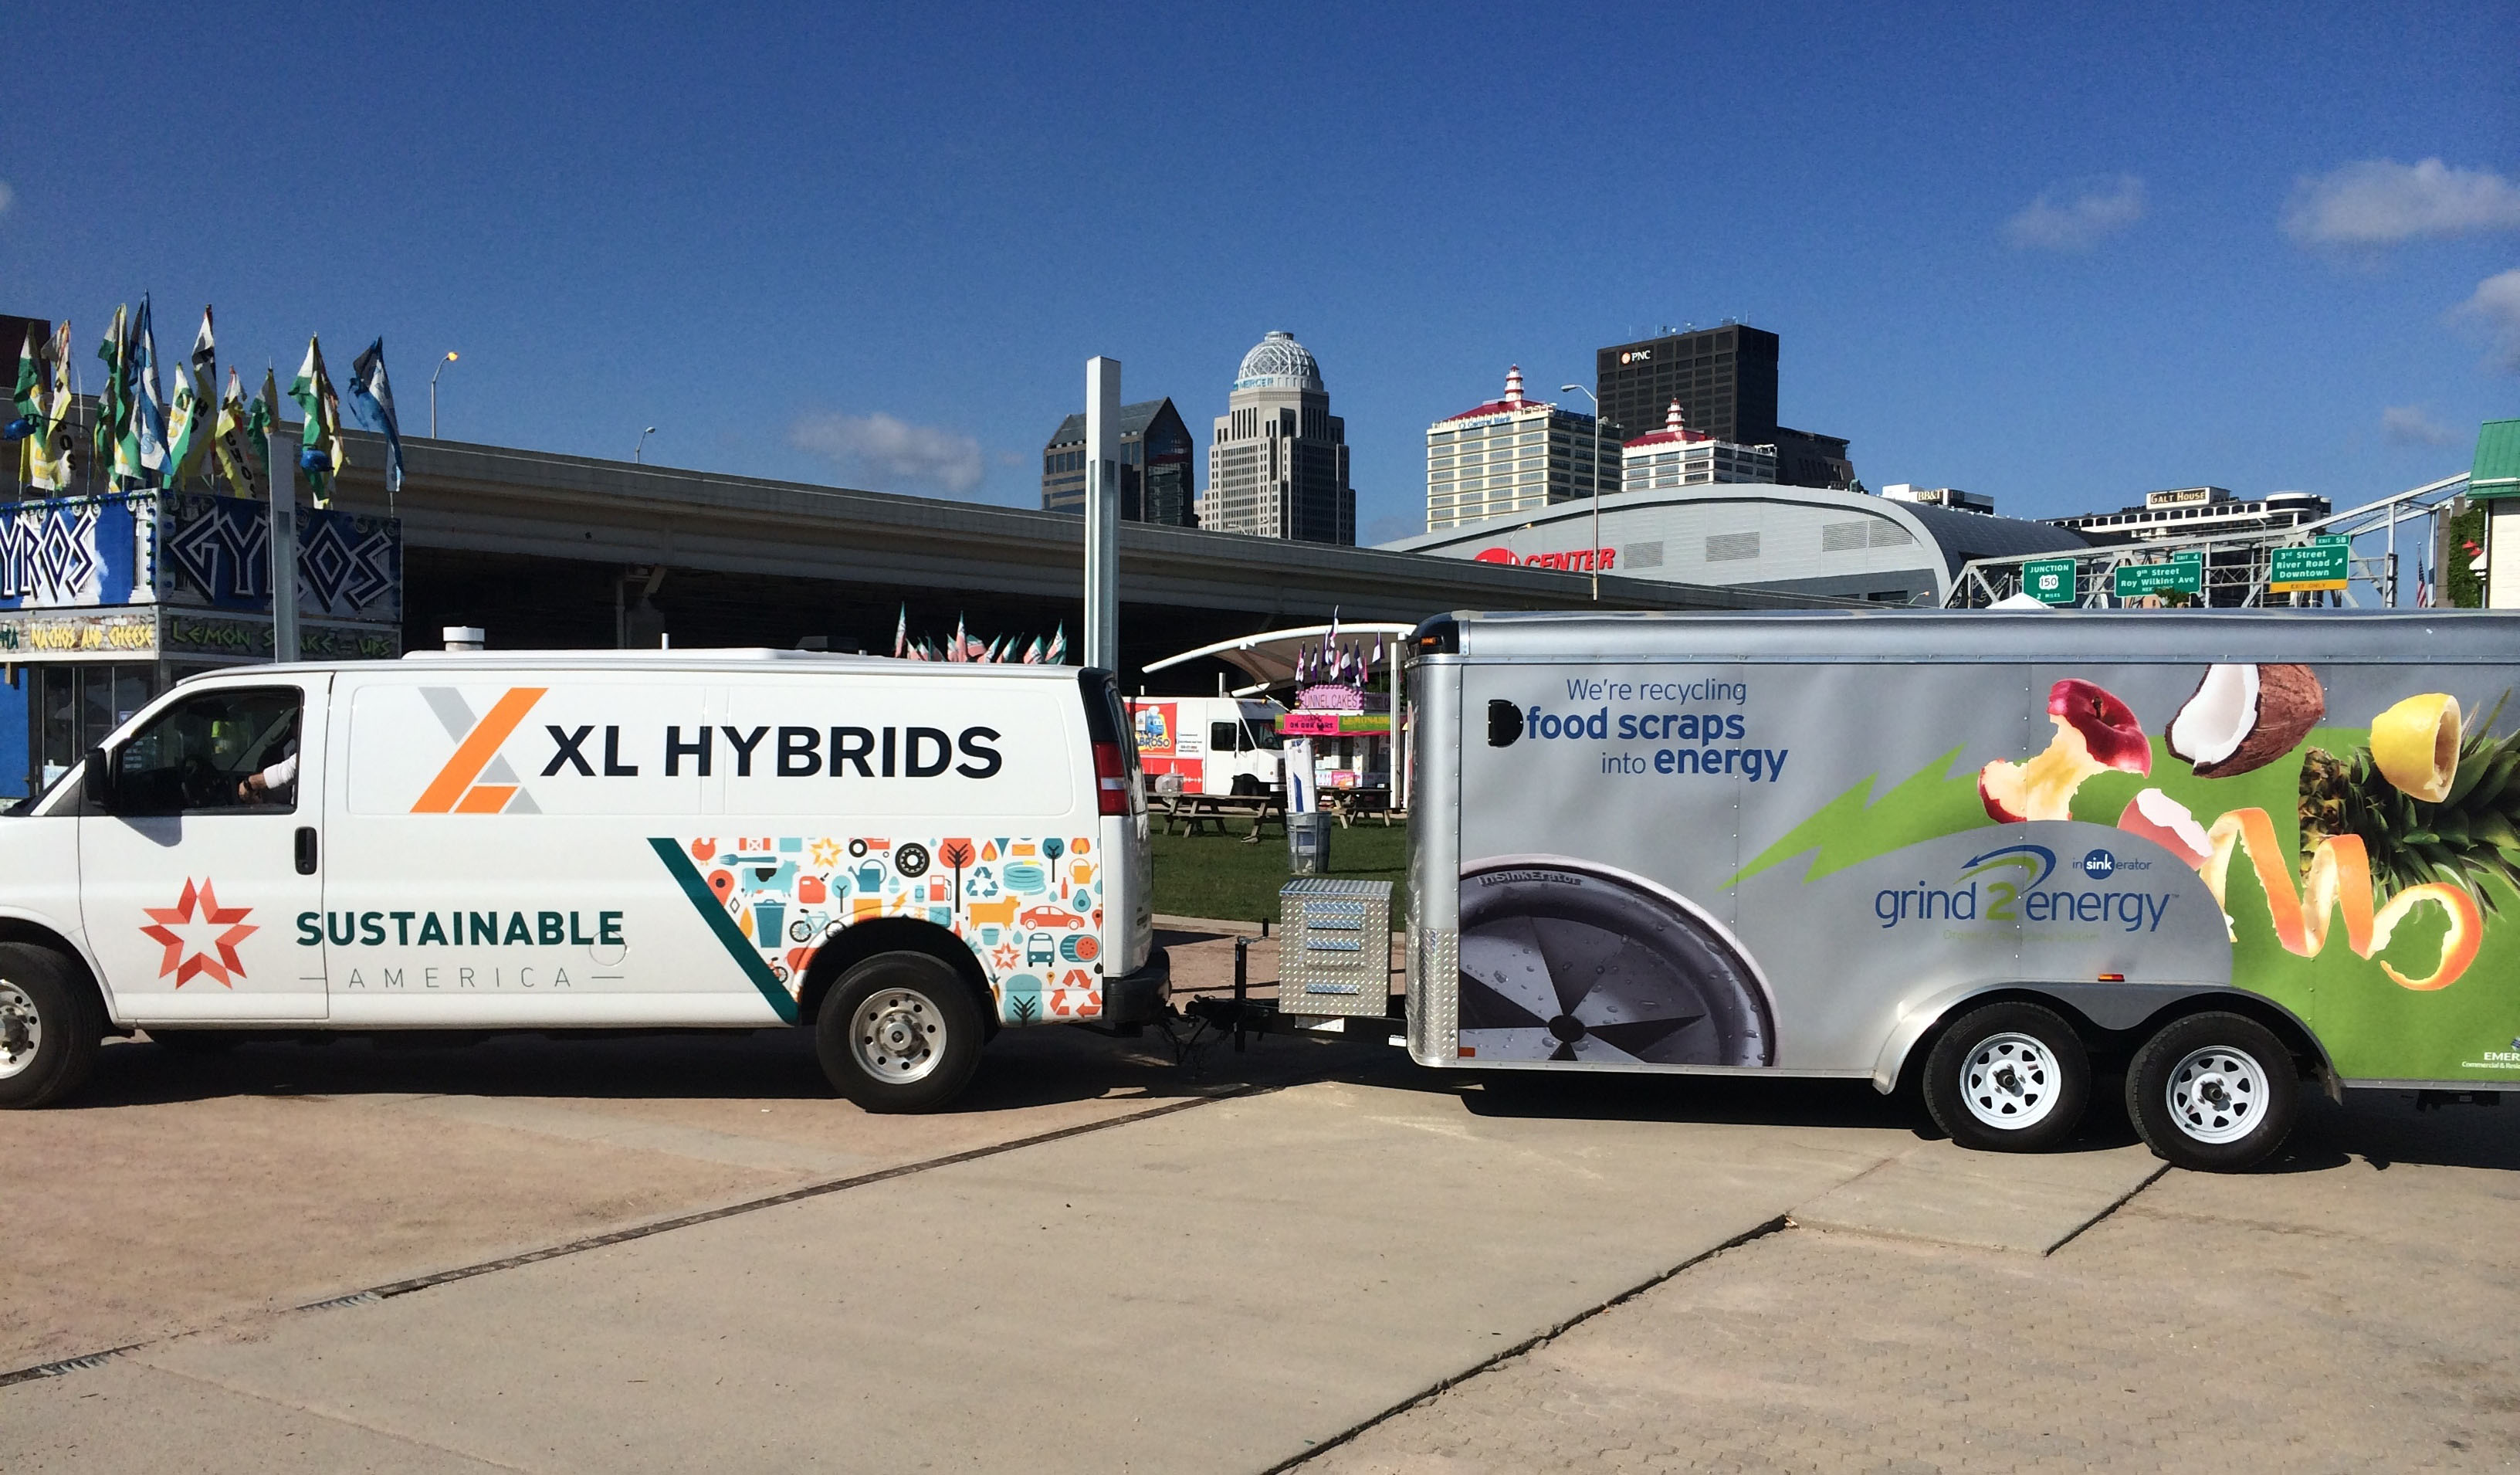 Sustainable America's XL Hybrids Van with Grind2Energy Trailer